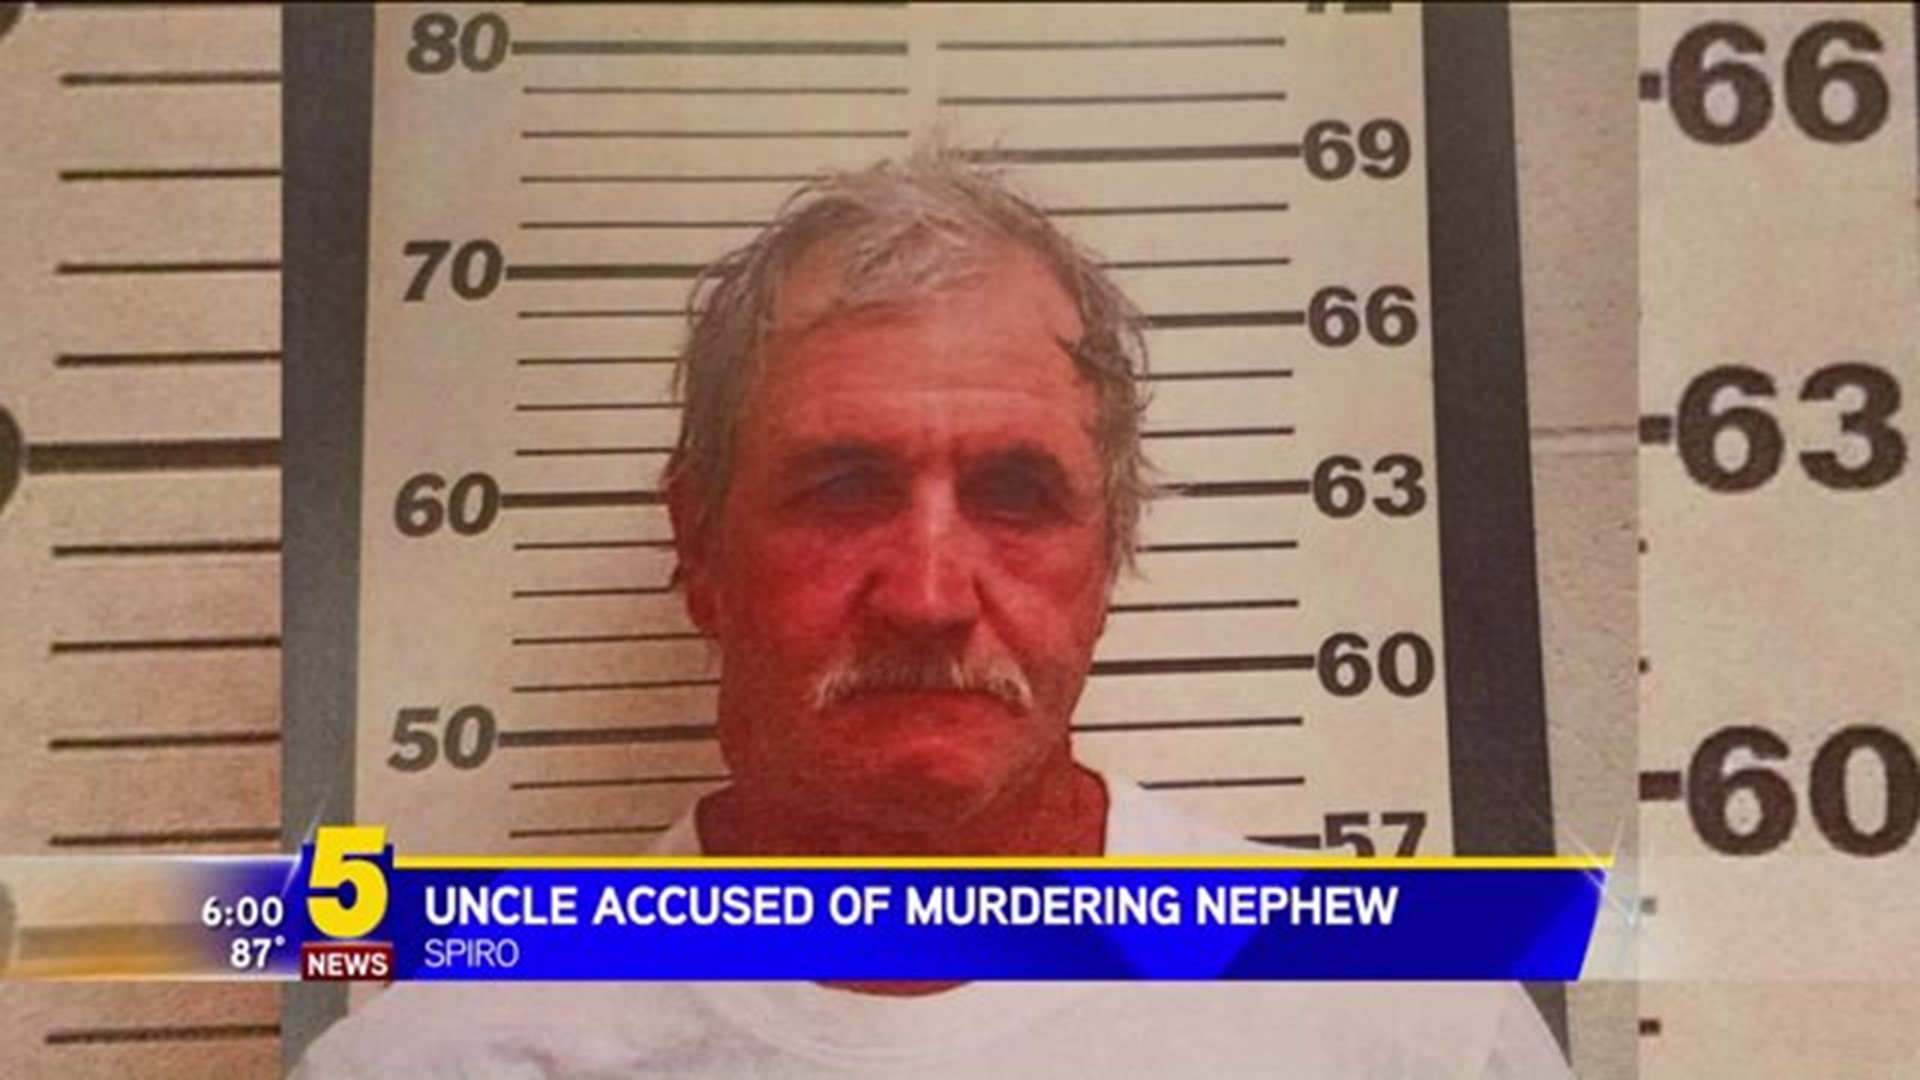 Family Reacts After Uncle Accused Of Murdering Nephew